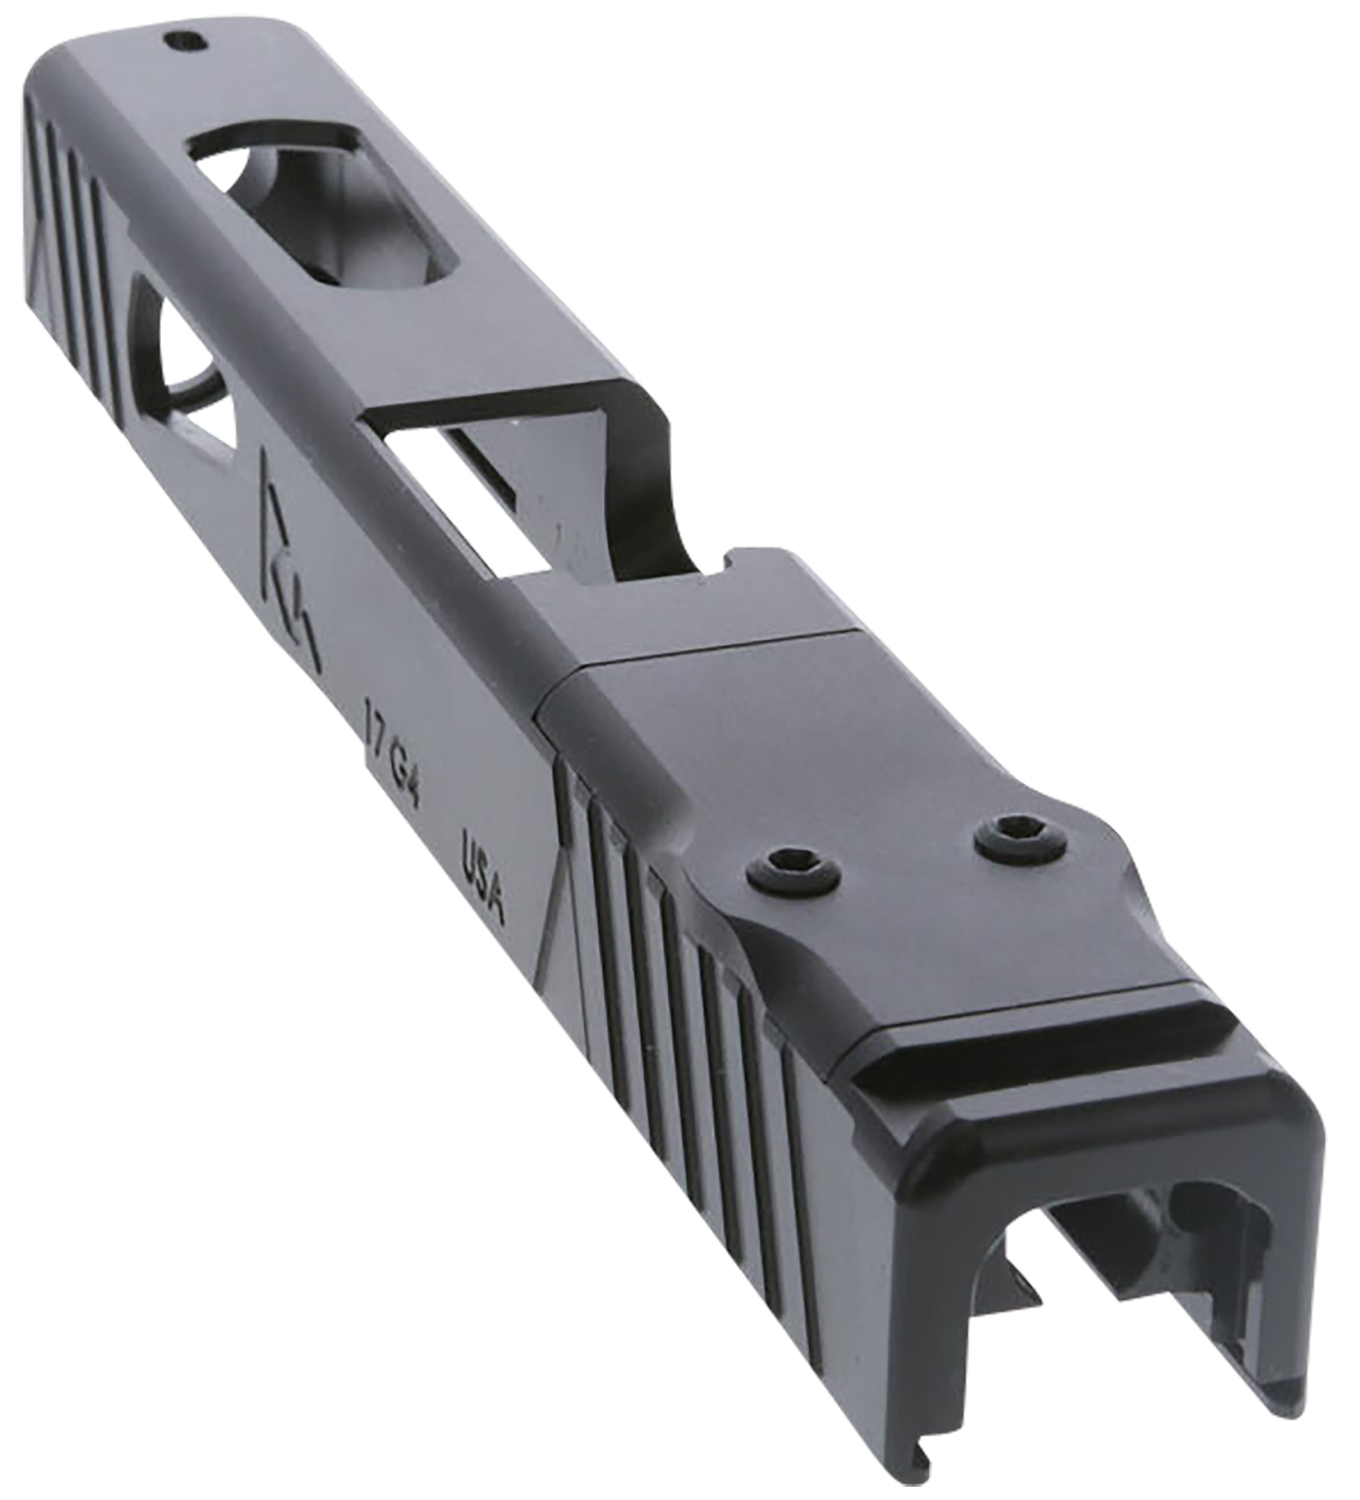 RIVAL ARMS GLOCK STRIPPED SLIDE W/RMR CUT FOR G17 G4 BLK